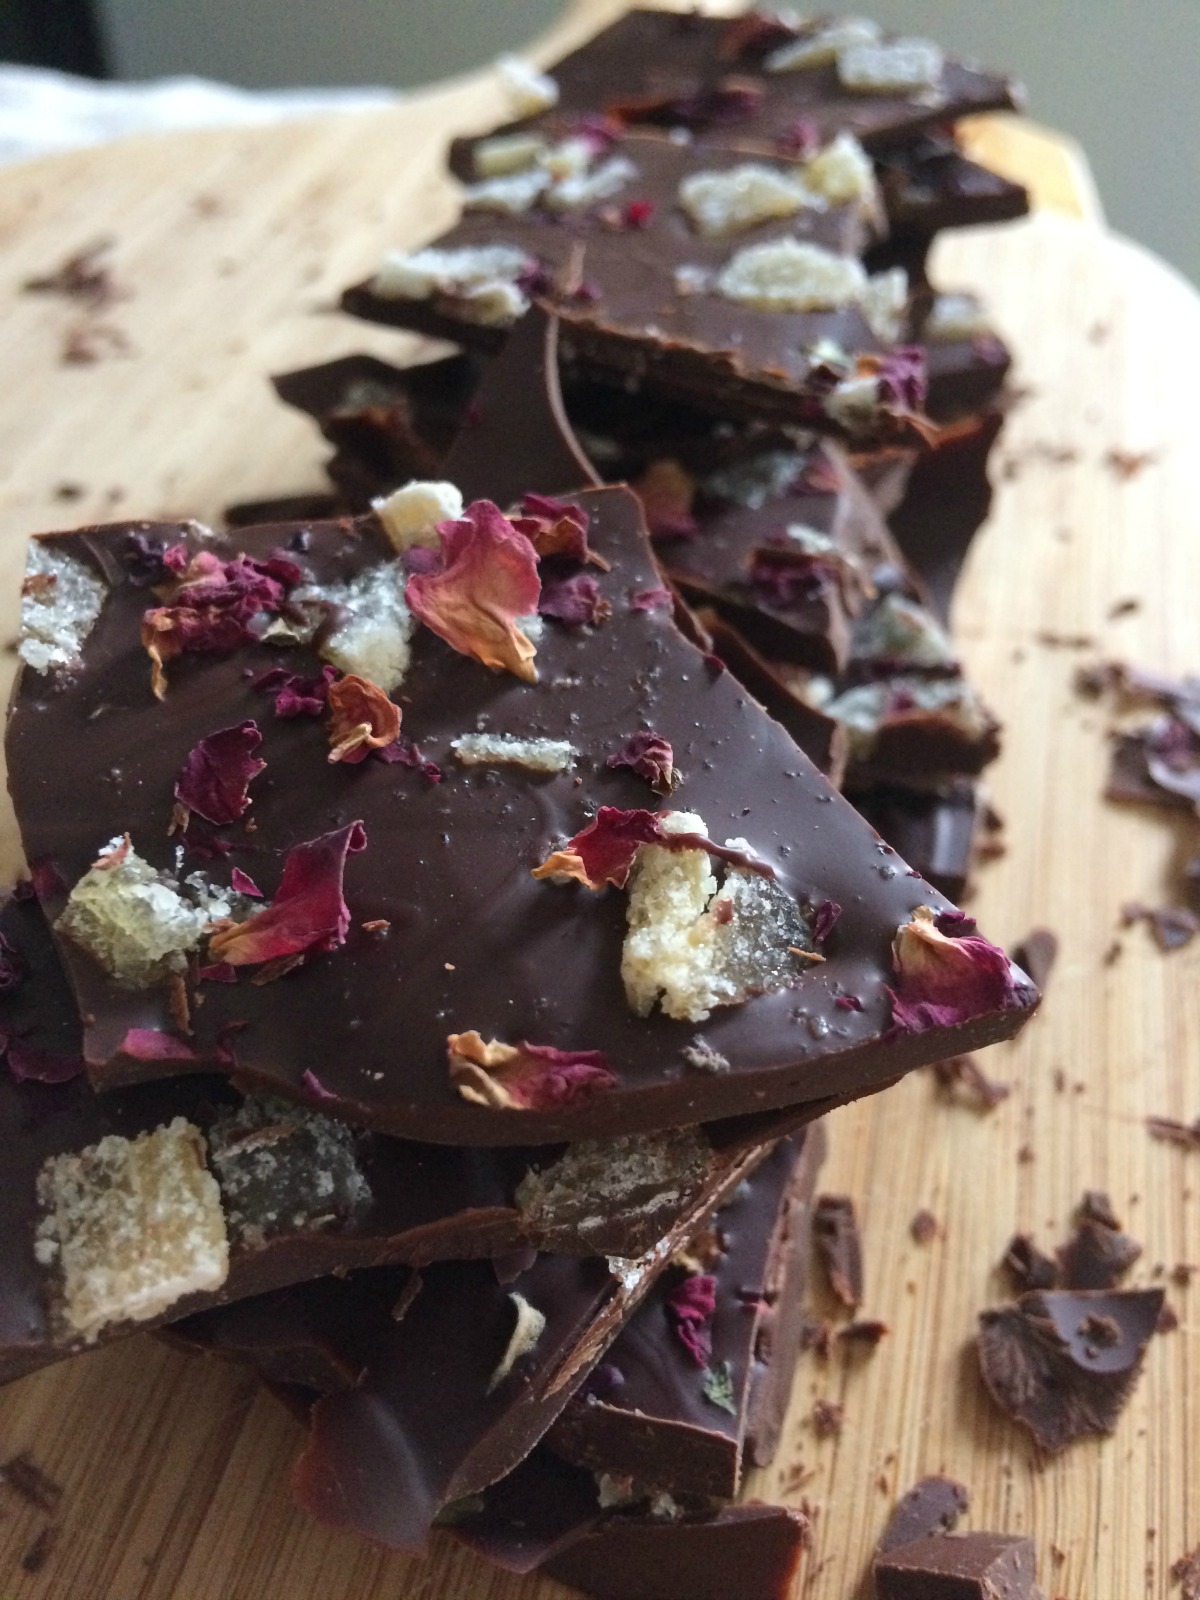 3 Herbal Chocolate Recipes To Inspire Love and Passion | Herbal Academy | Want to inspire love and passion this Valentine's Day? Try your hand at creating these herbal chocolate recipes that your sweetheart is sure to love!